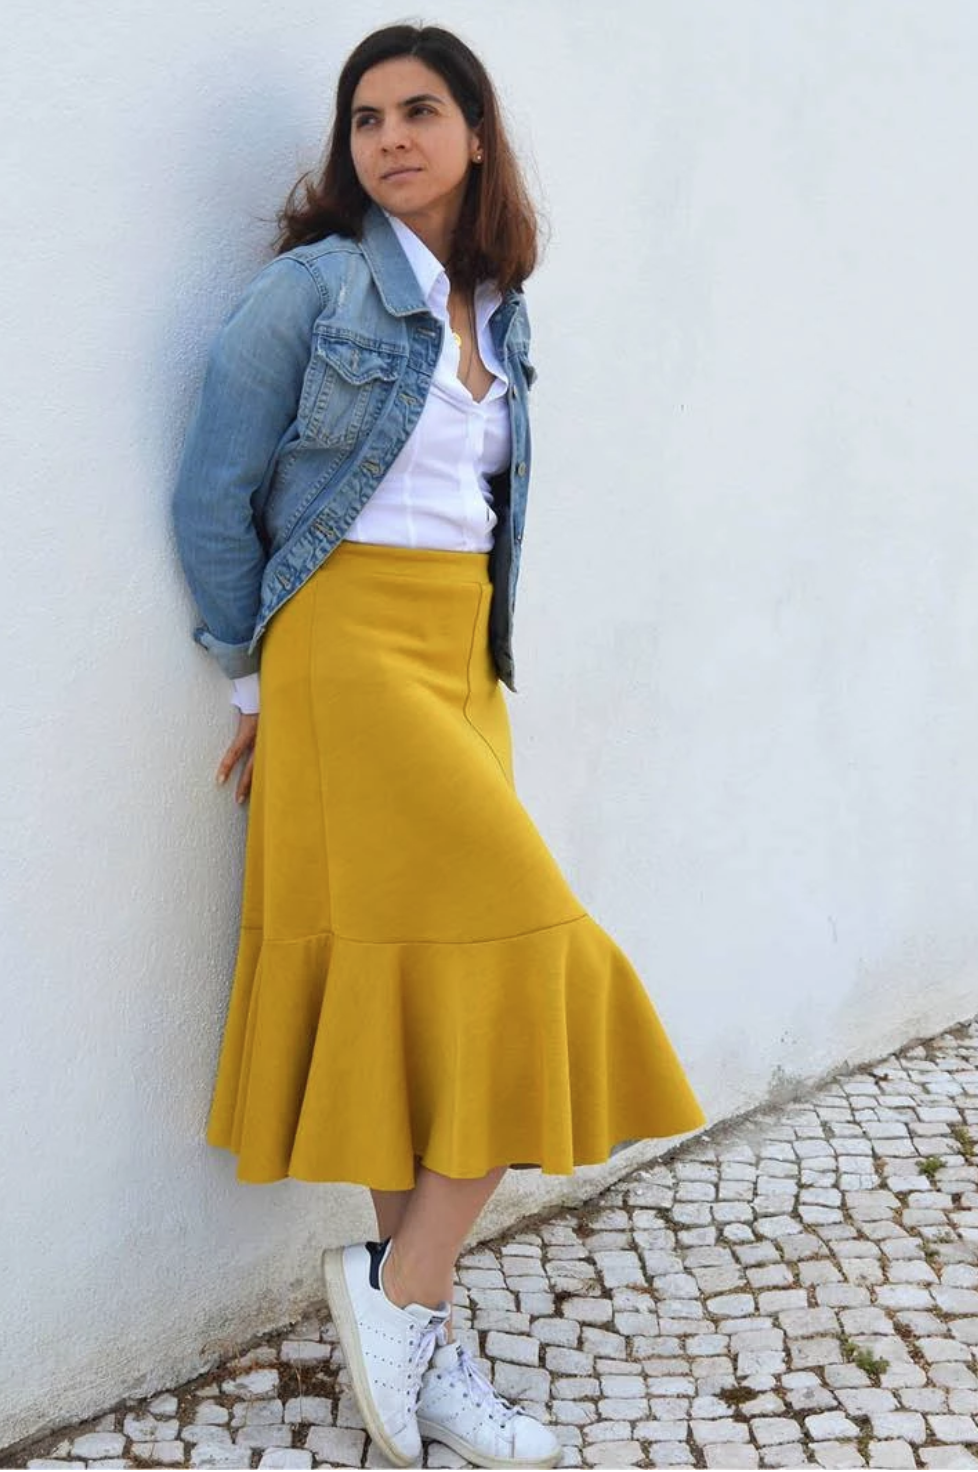 Woman wearing the Linea A-Line Skirt sewing pattern from Wardrobe by Me on The Fold Line. A skirt pattern made in light to medium weight knit jersey fabrics, featuring a four gored skirt, elasticated waist, midi length hem and circular voilant sewn to the